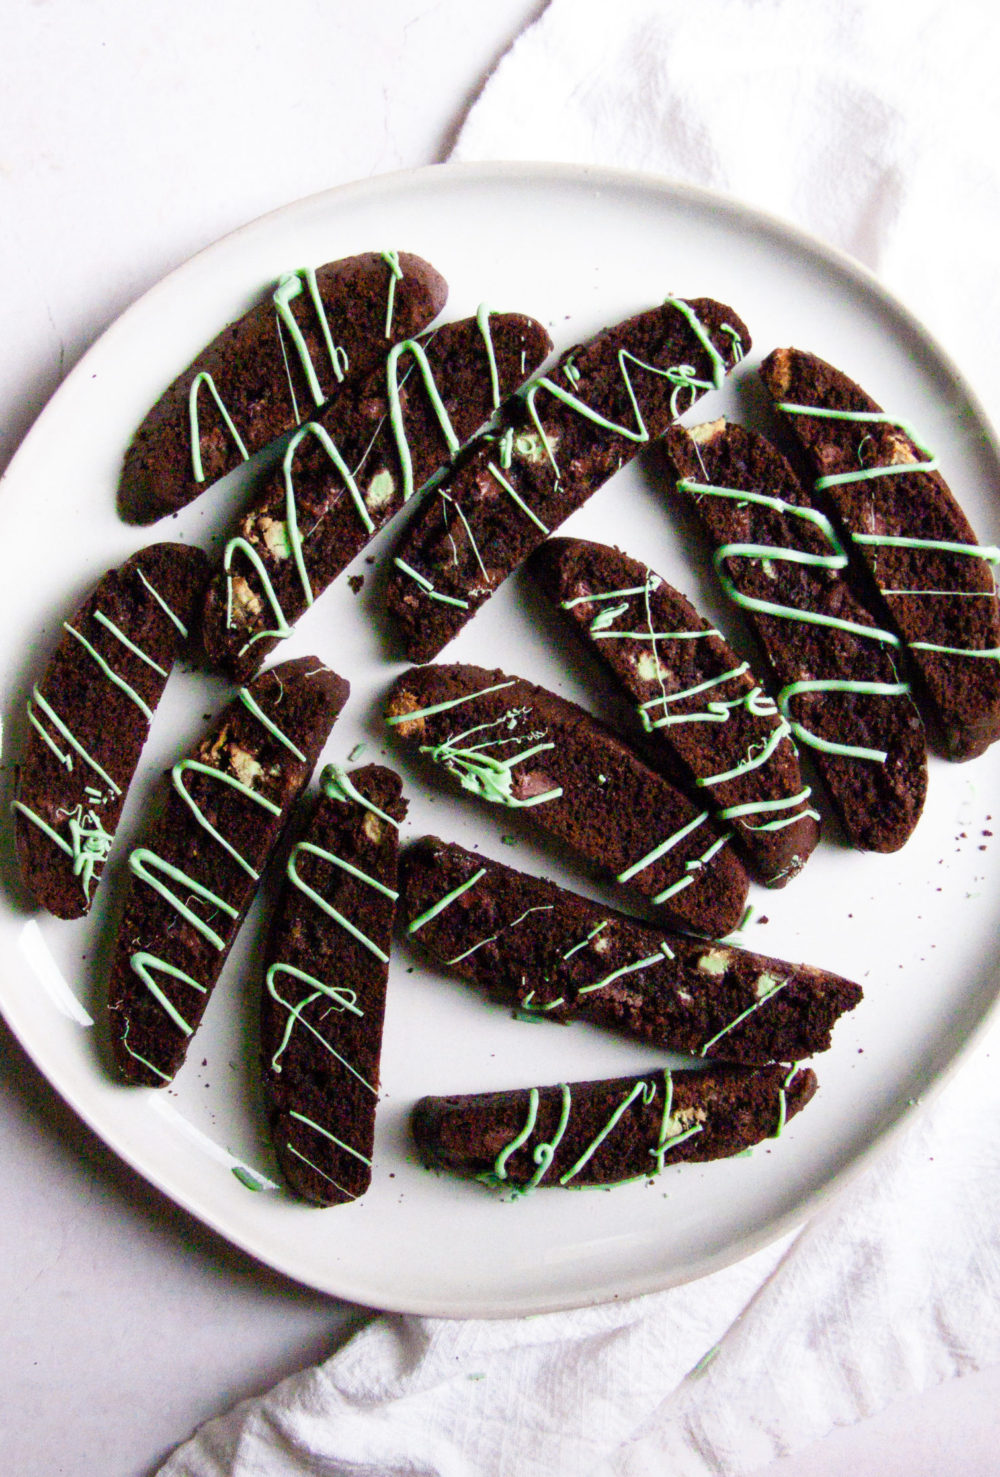 Multiple mint cookies on a plate surrounded by a linen